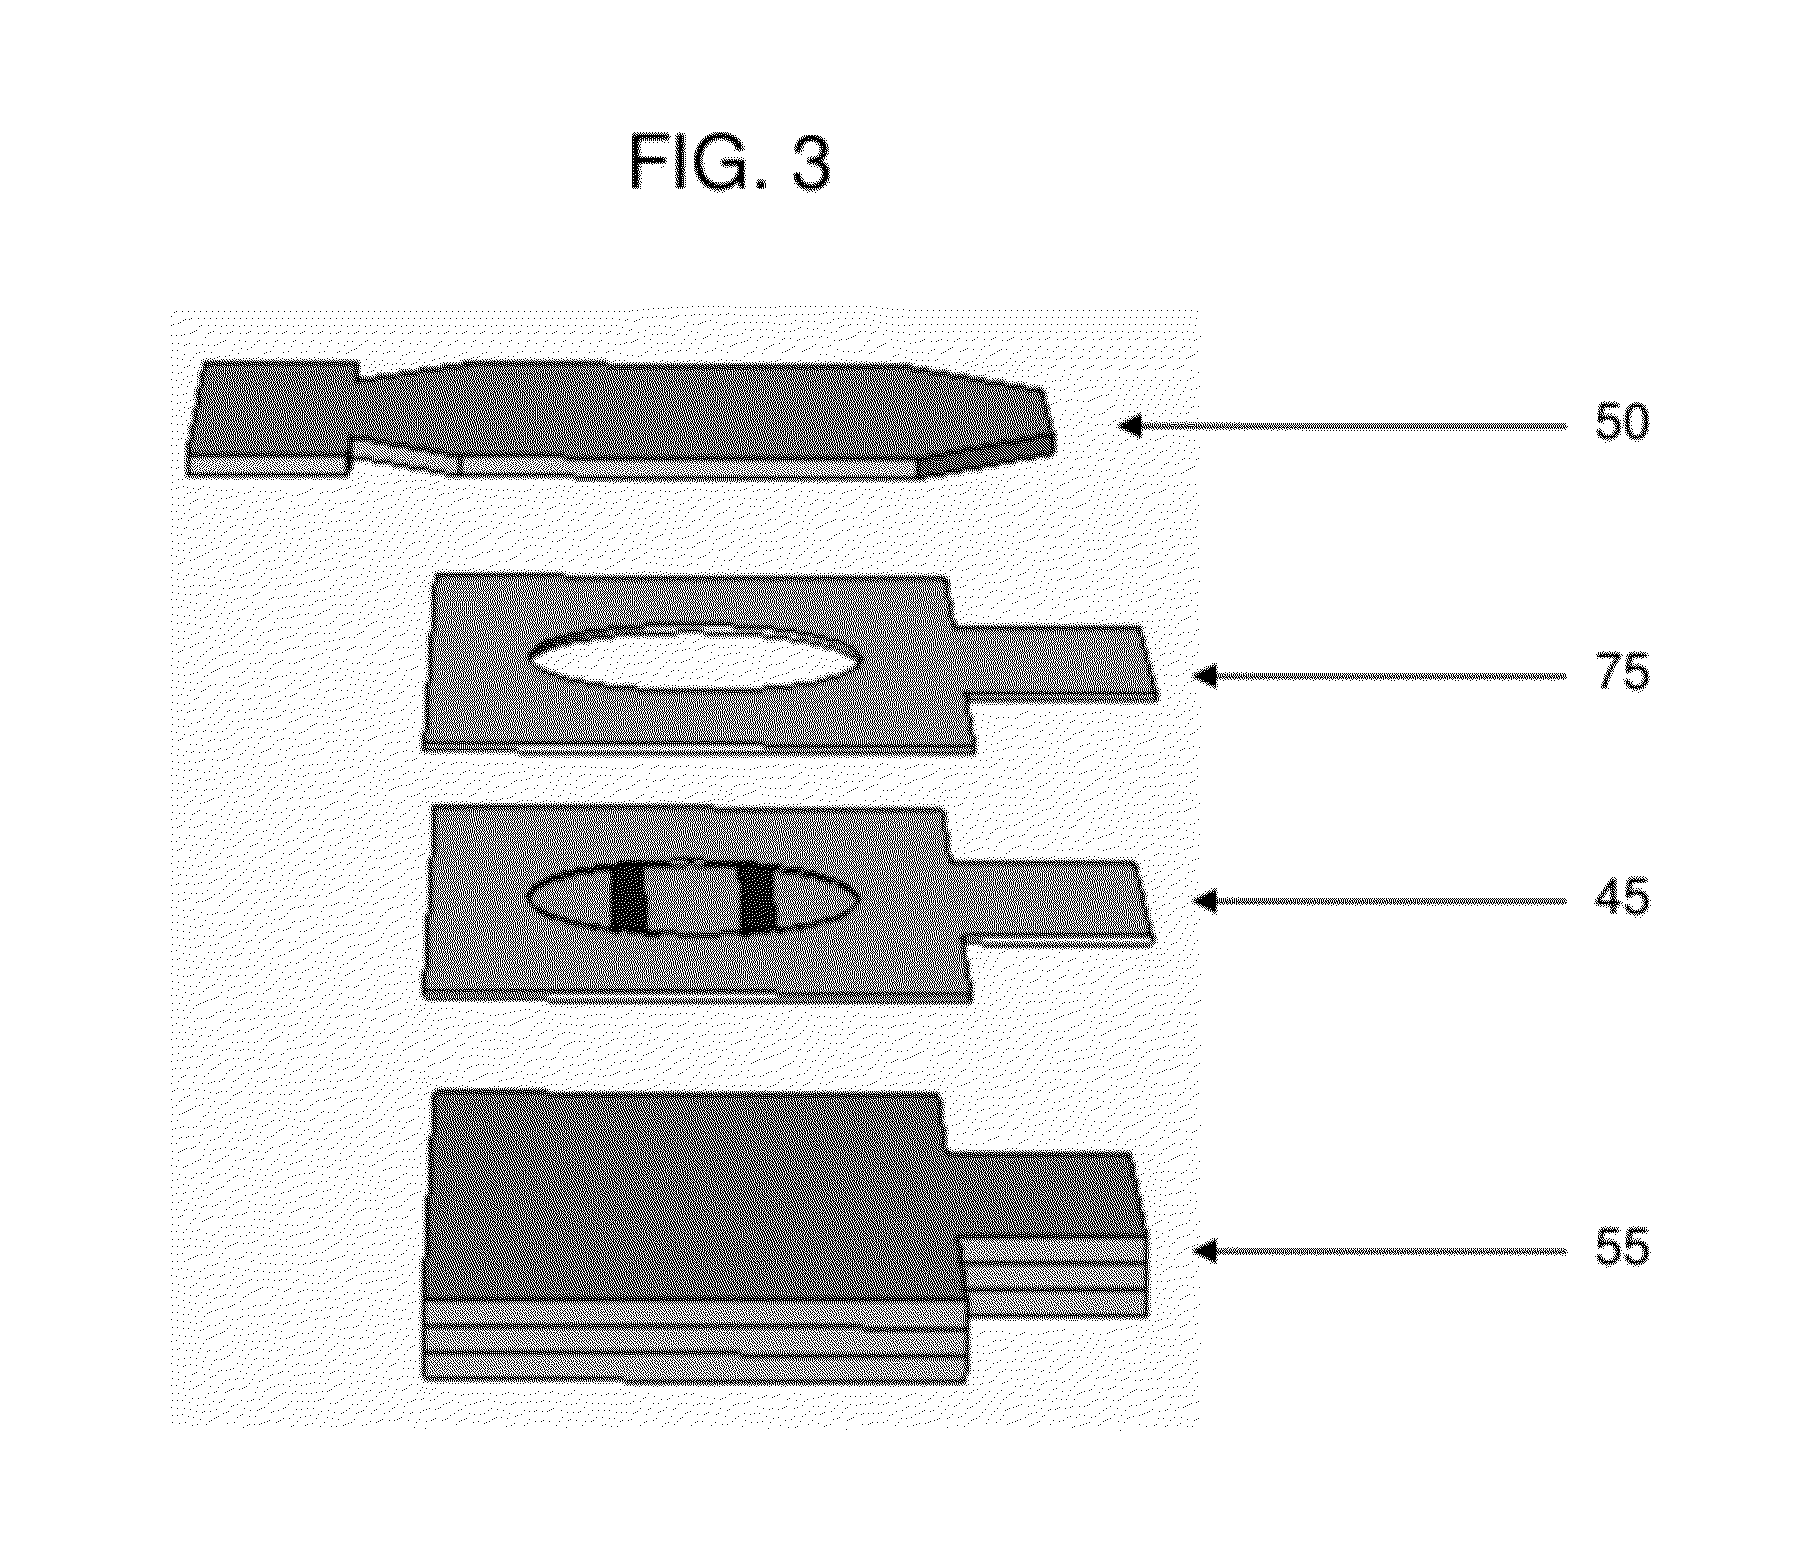 Analyte Detection Devices, Multiplex and Tabletop Devices for Detection of Analyte, and Uses Thereof